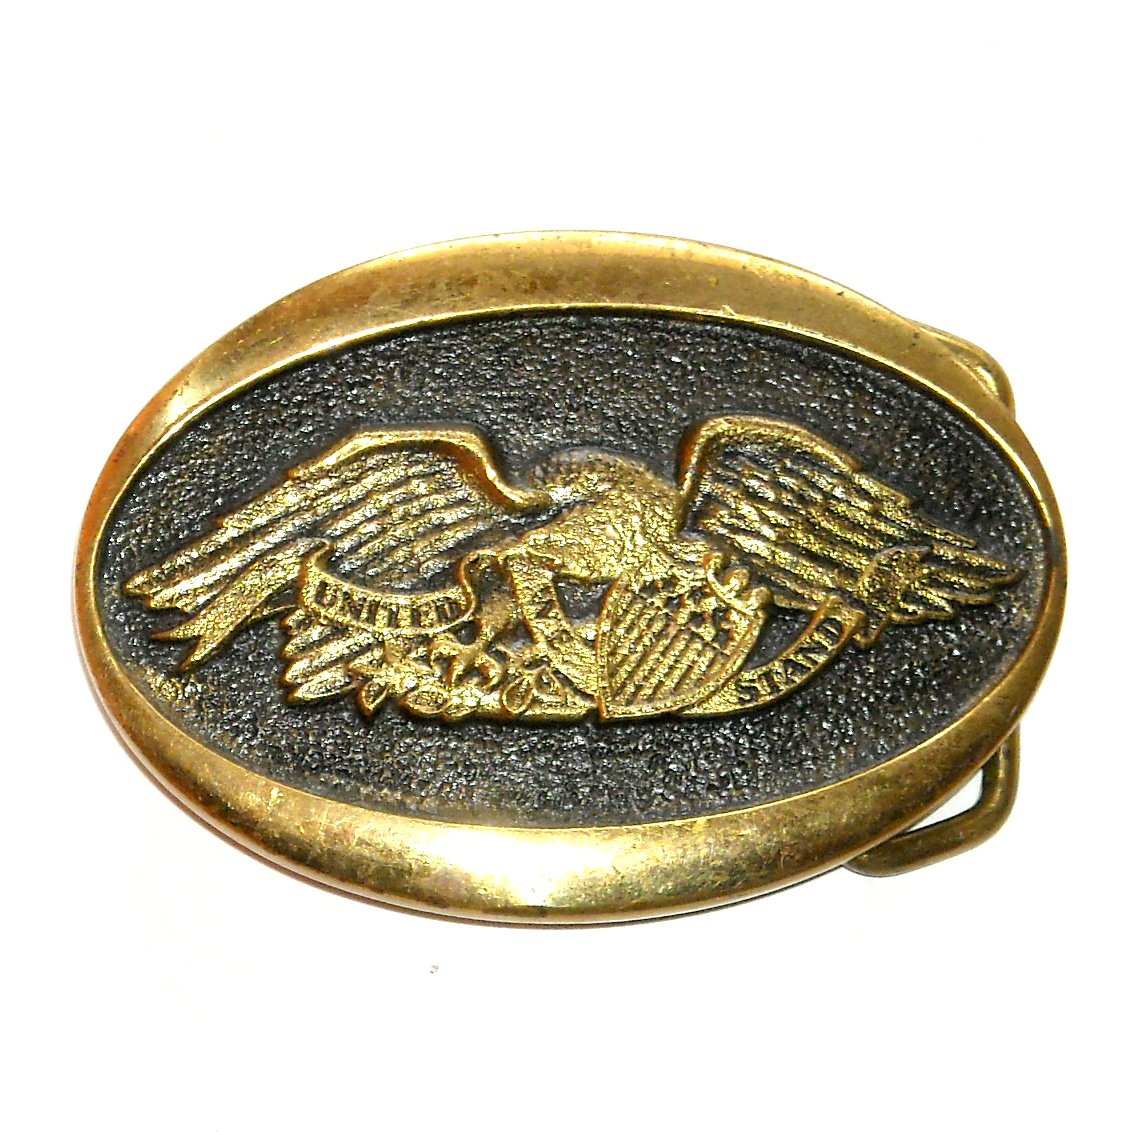 United We Stand American Eagle Heritage Mint A 3682 Solid Brass